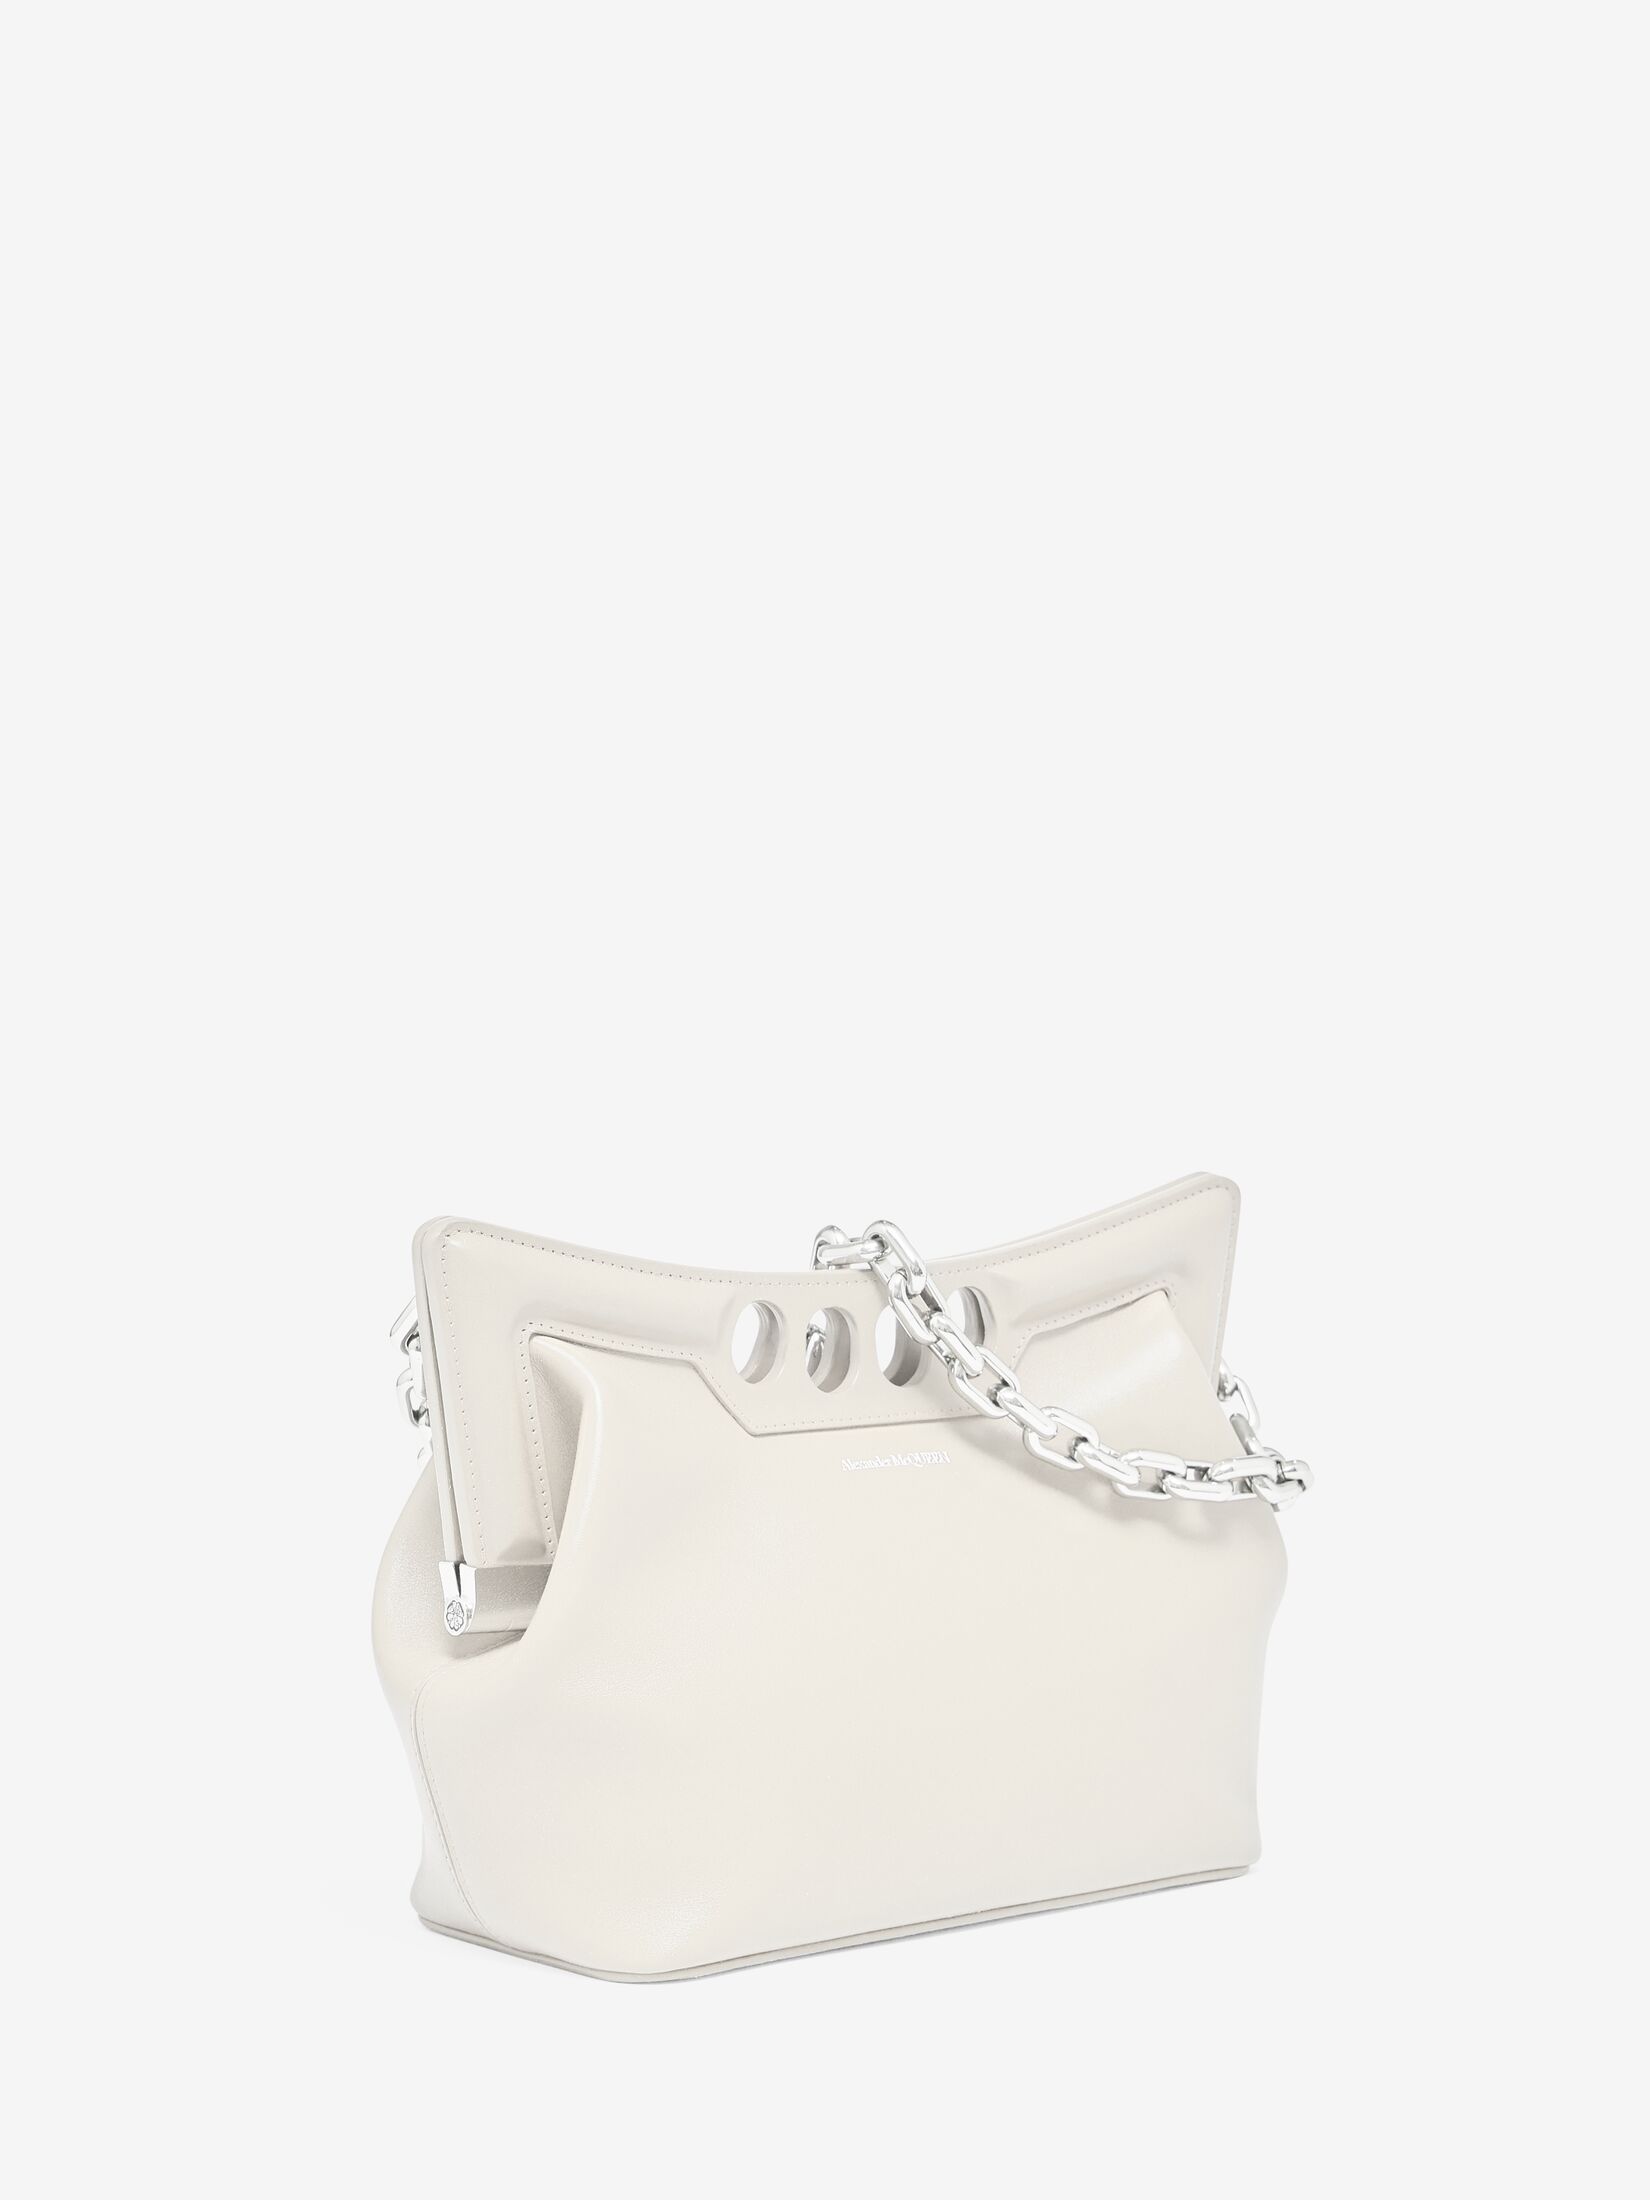 The Peak Bag Small in Soft Ivory | Alexander McQueen US